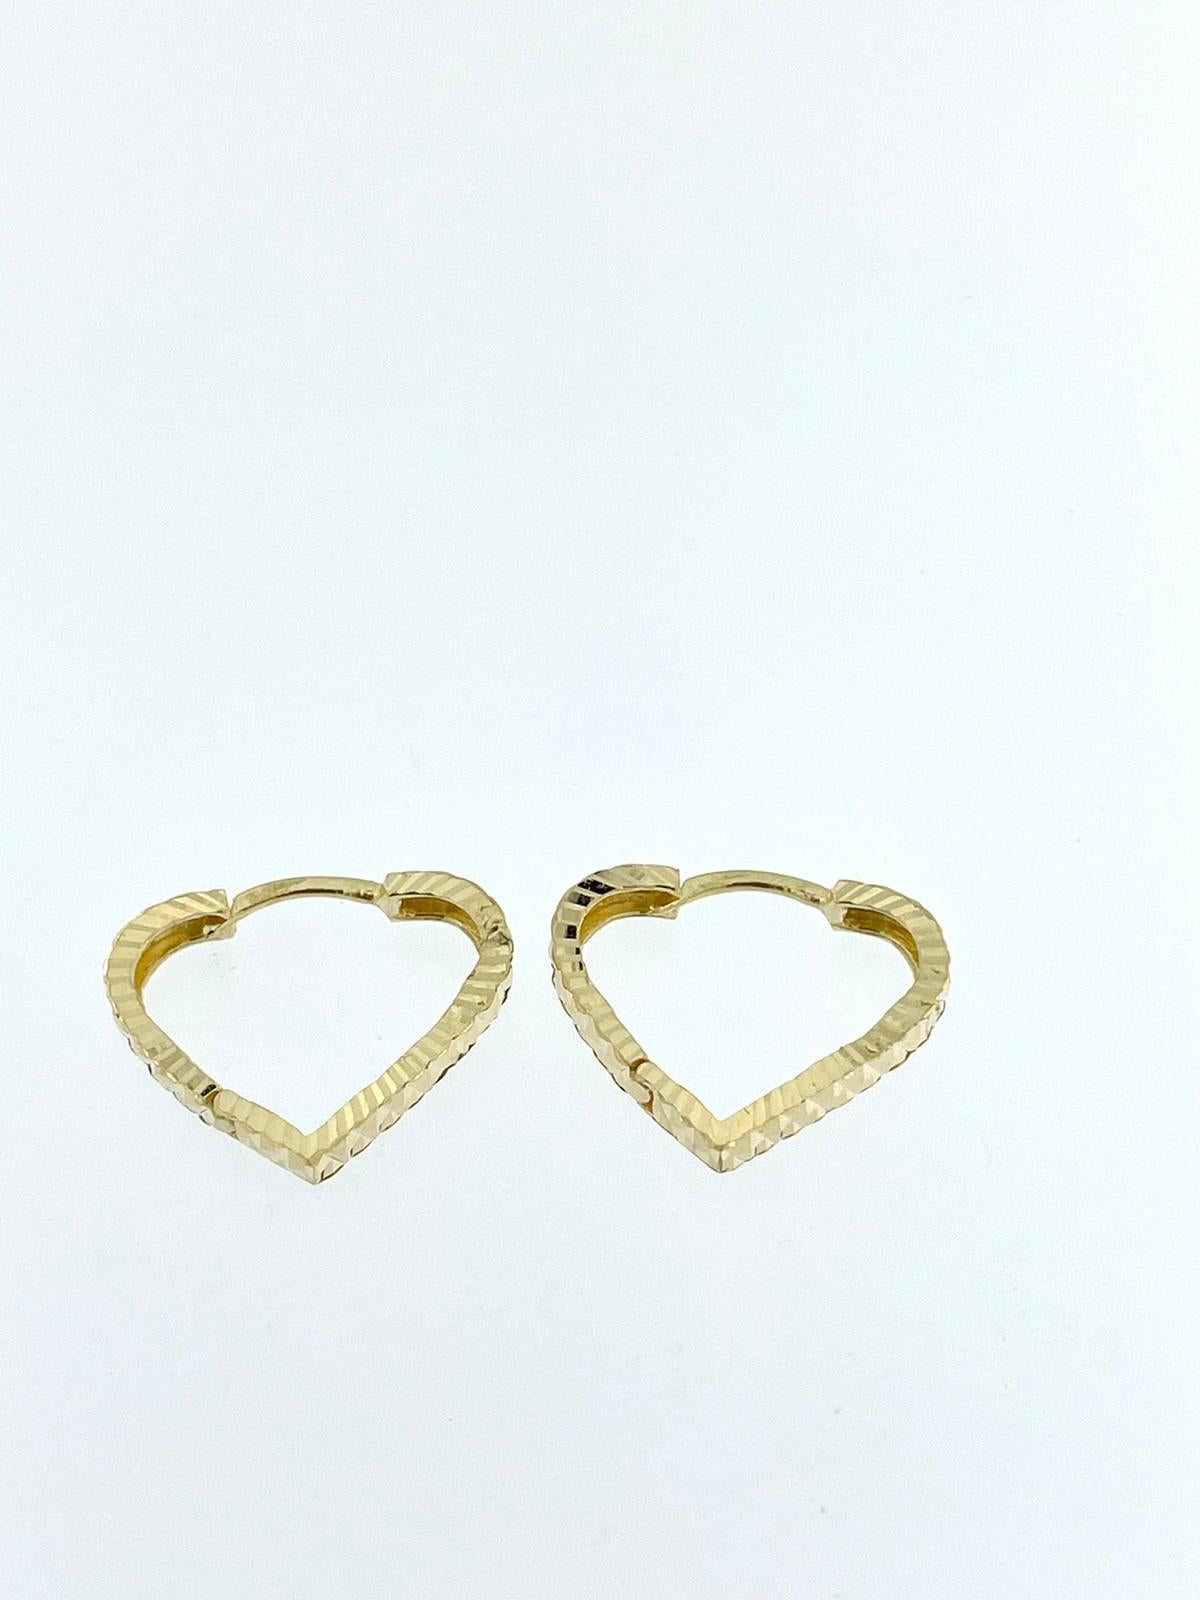 The Yellow Gold Heart Shaped Hoop Earrings, crafted in 18-karat gold, offer a blend of charm and sophistication. These earrings feature a unique heart-shaped hoop design, adding a touch of romance to any ensemble.

The relief work on the earrings